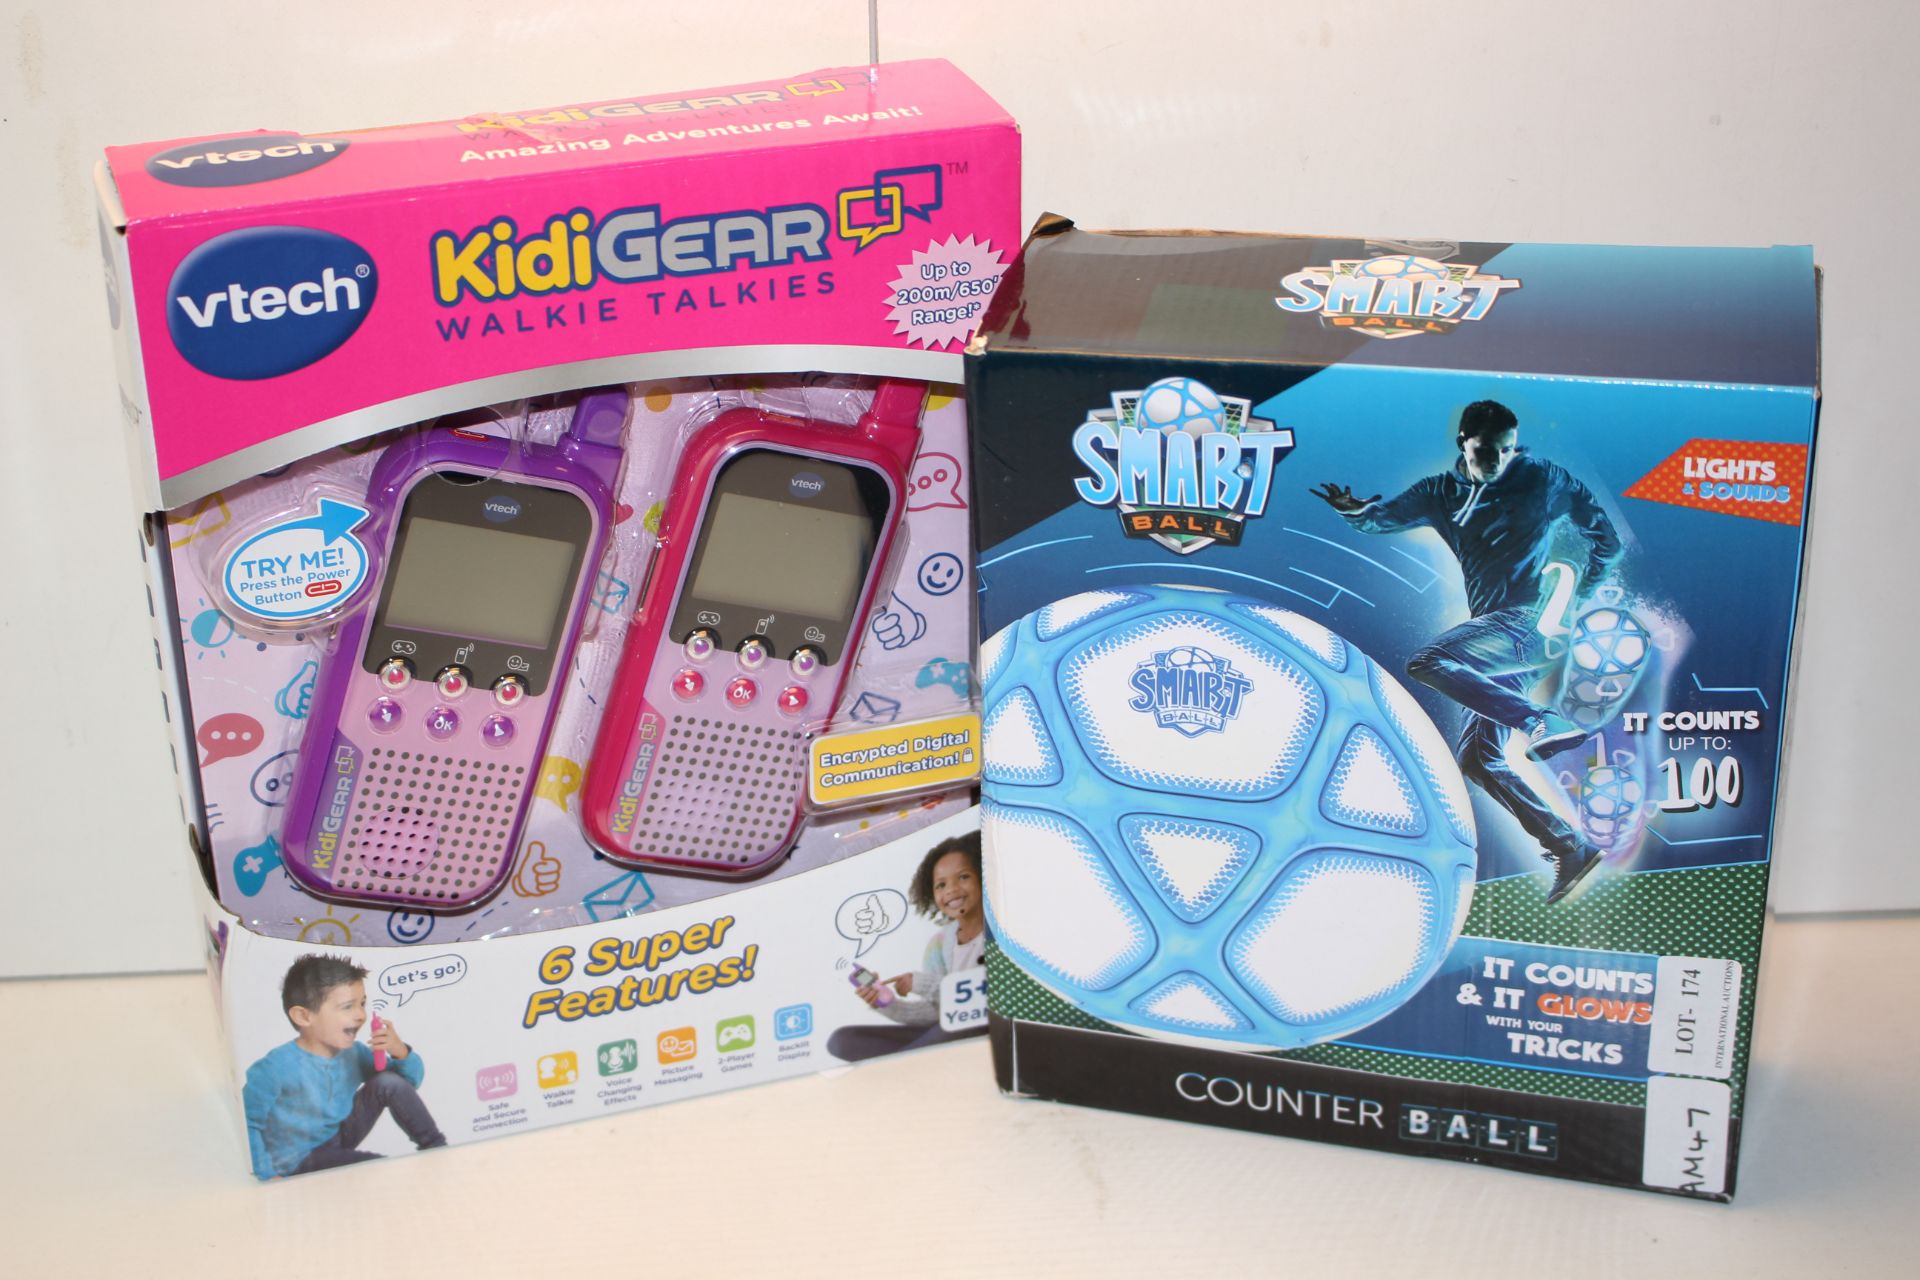 2X ASSORTED BOXED ITEMS TO INCLUDE VTECH KIDIGEAR WALKIE TALKIES & OTHER (IMAGE DEPICTS STOCK)